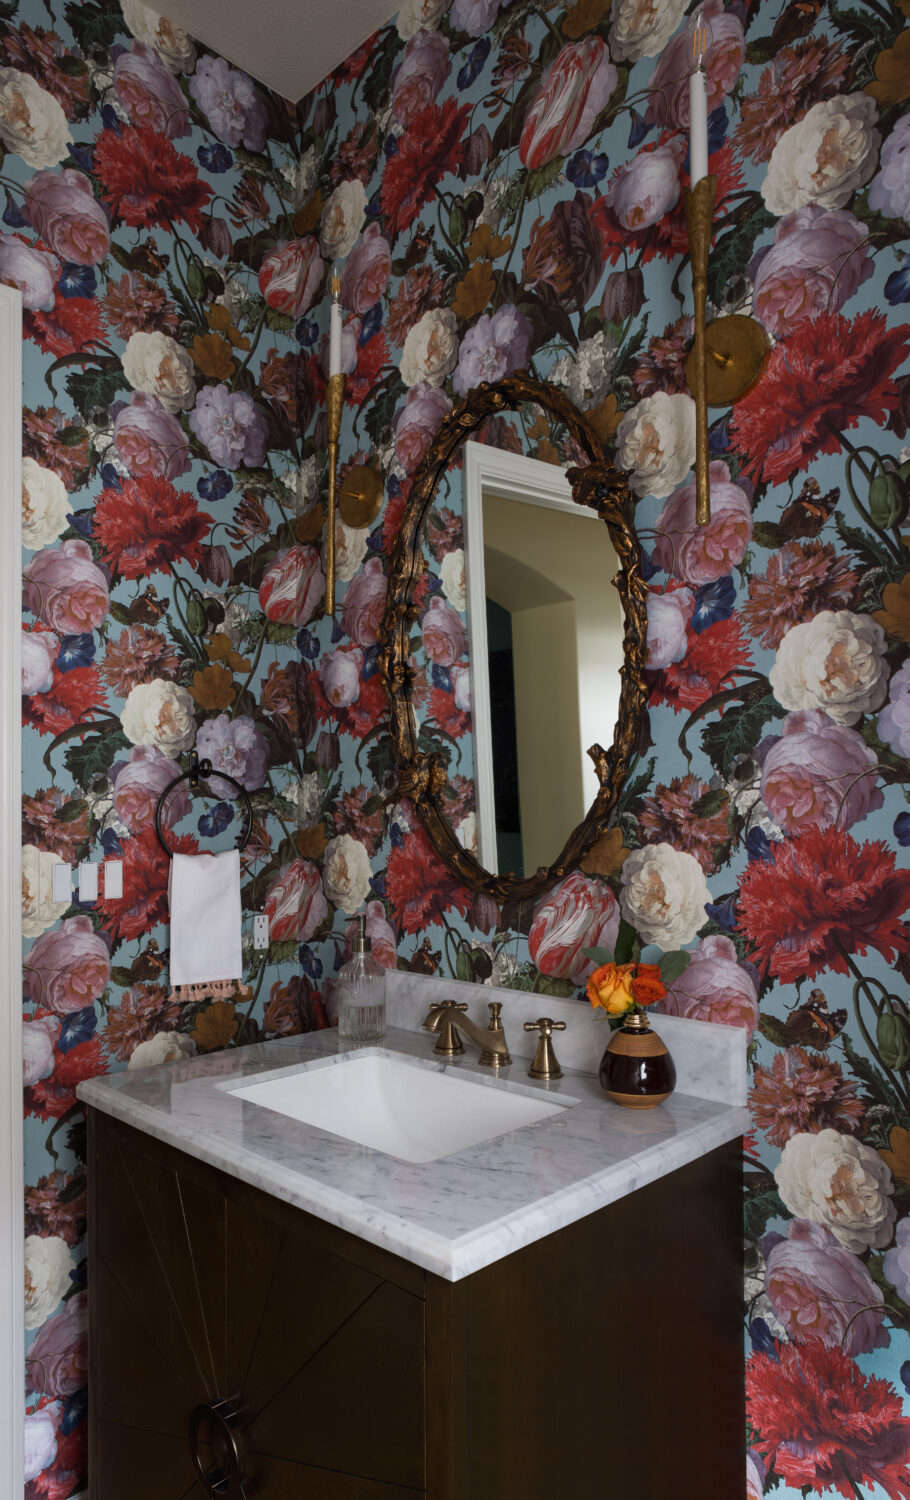 Learn Ways to Spruce Up Your Bathroom